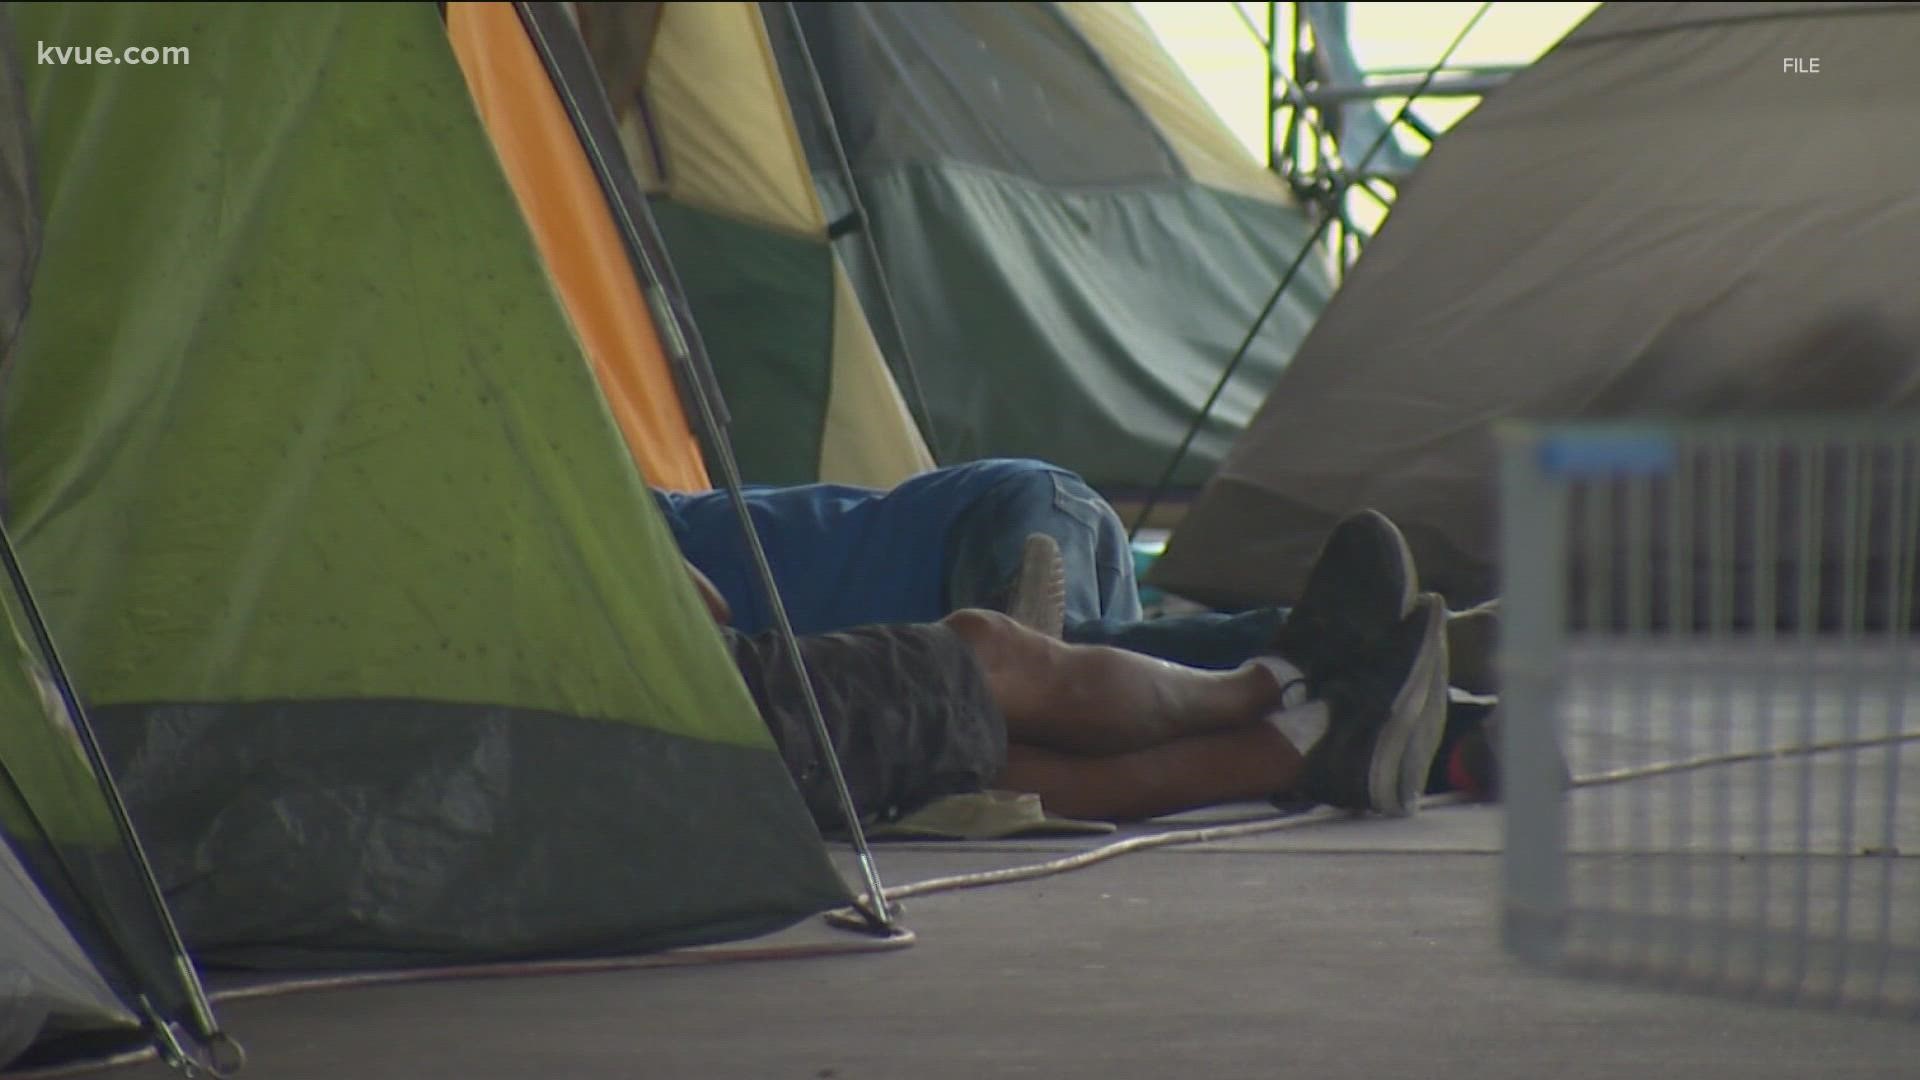 Travis County commissioners will consider allocating around $110 million in American Rescue Plan Act funding for homeless solutions. KVUE's Bryce Newberry explains.